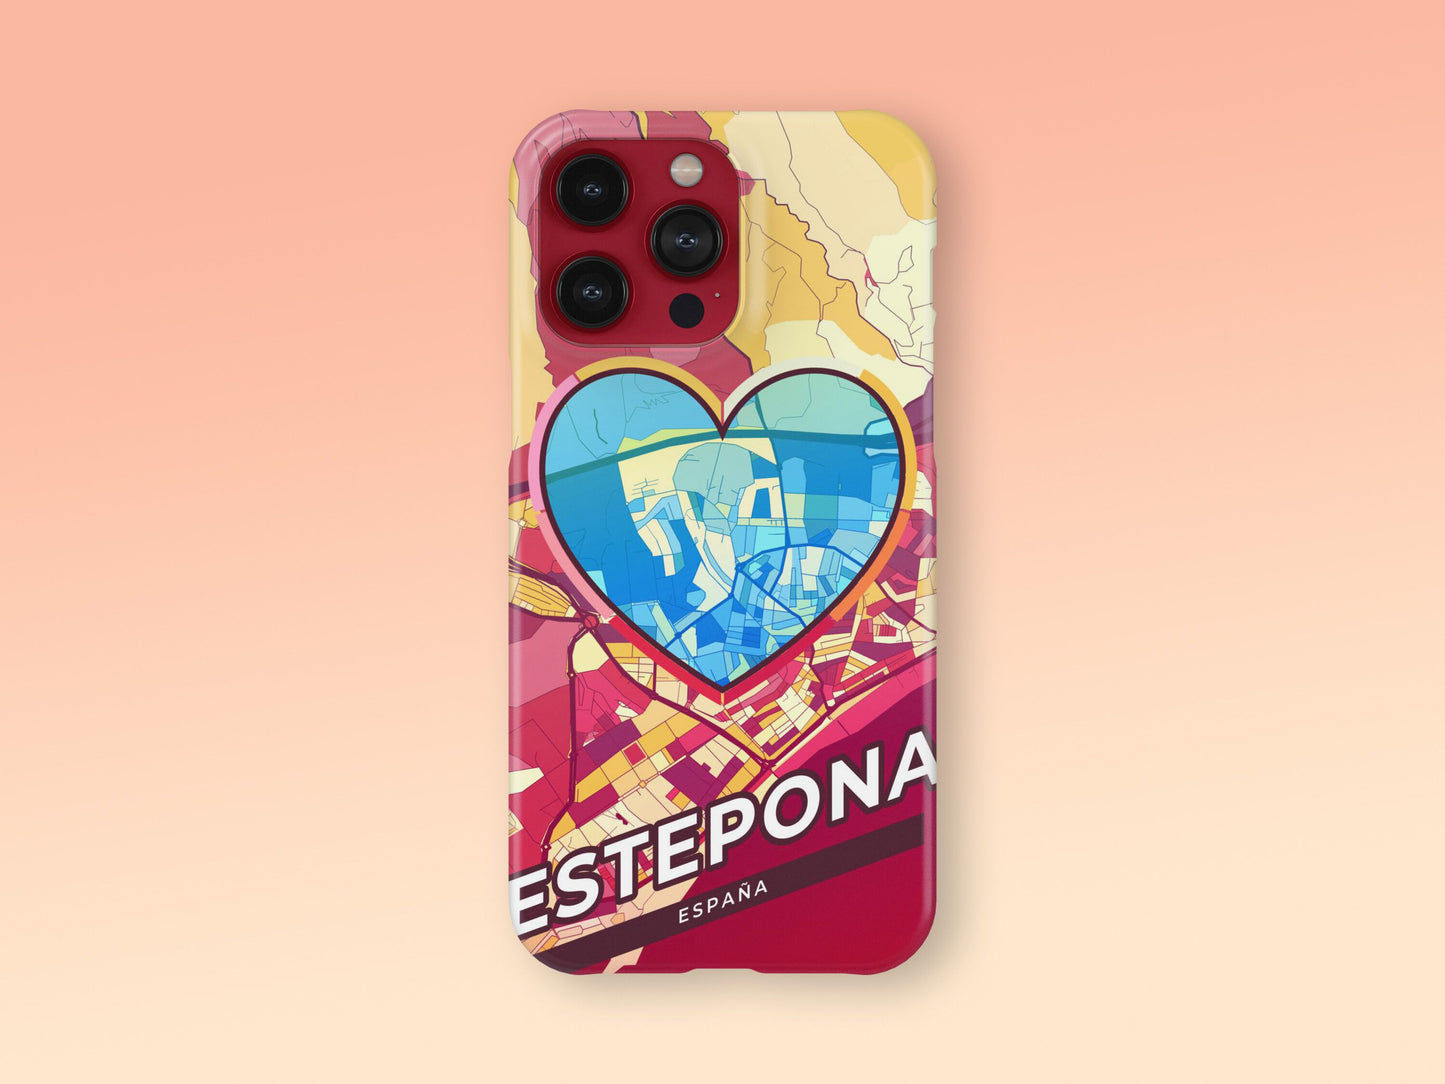 Estepona Spain slim phone case with colorful icon. Birthday, wedding or housewarming gift. Couple match cases. 2